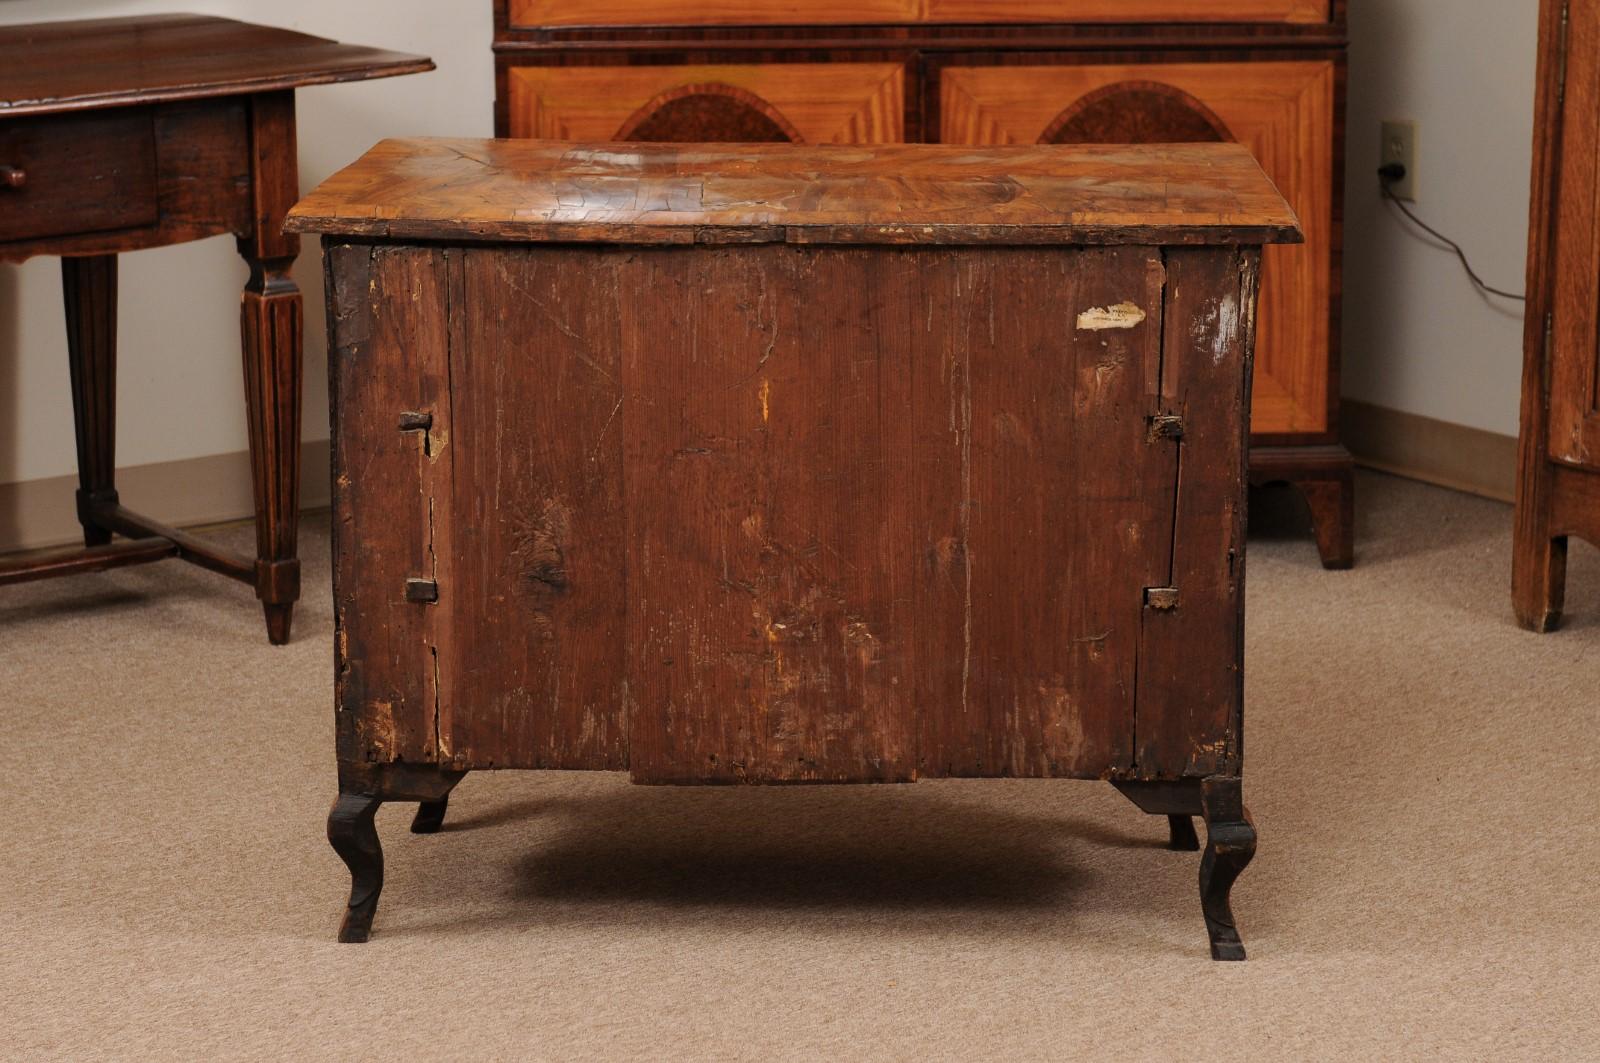 18th Century Italian 3-Drawer Commode in Olivewood with Cabriole Legs For Sale 7